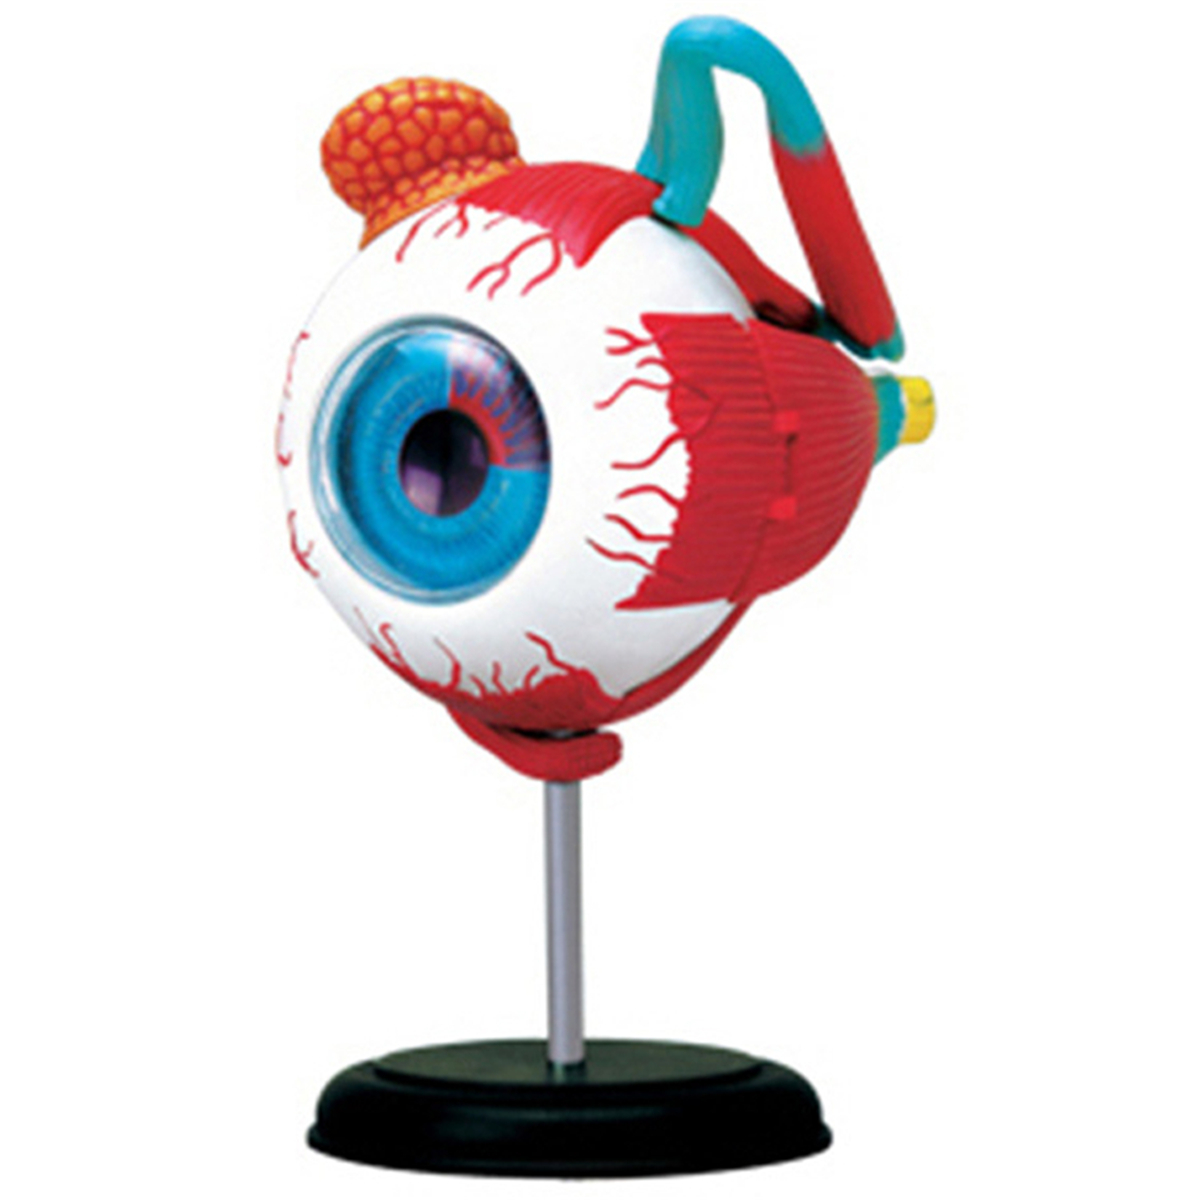 

4D Human Eyeball Teaching Model Separately Study Learning Instrument Science Toy